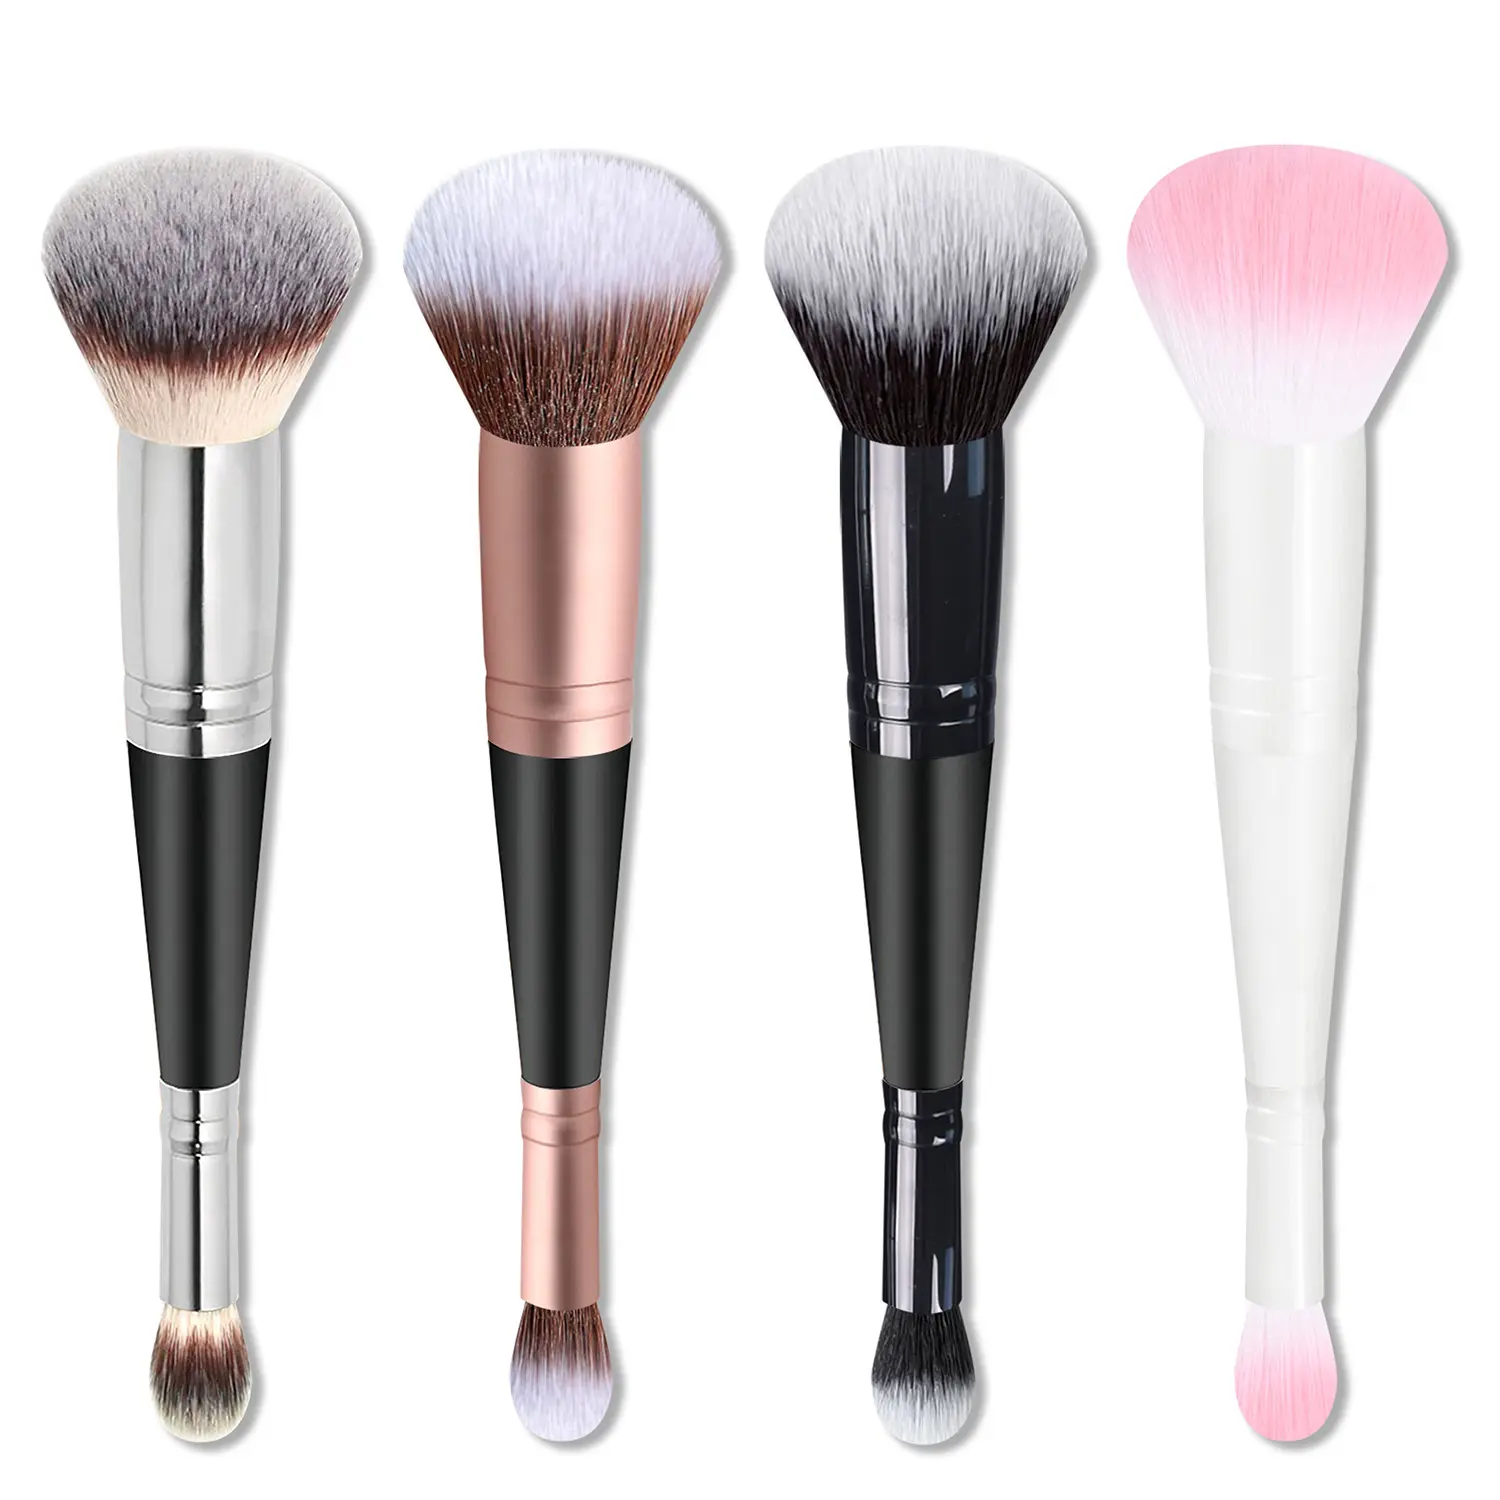 Best Selling New Rounded Tape Brush Make up Dual-ended Foundation Brush Concealer Private Label Synthetic Hair Makeup Brush